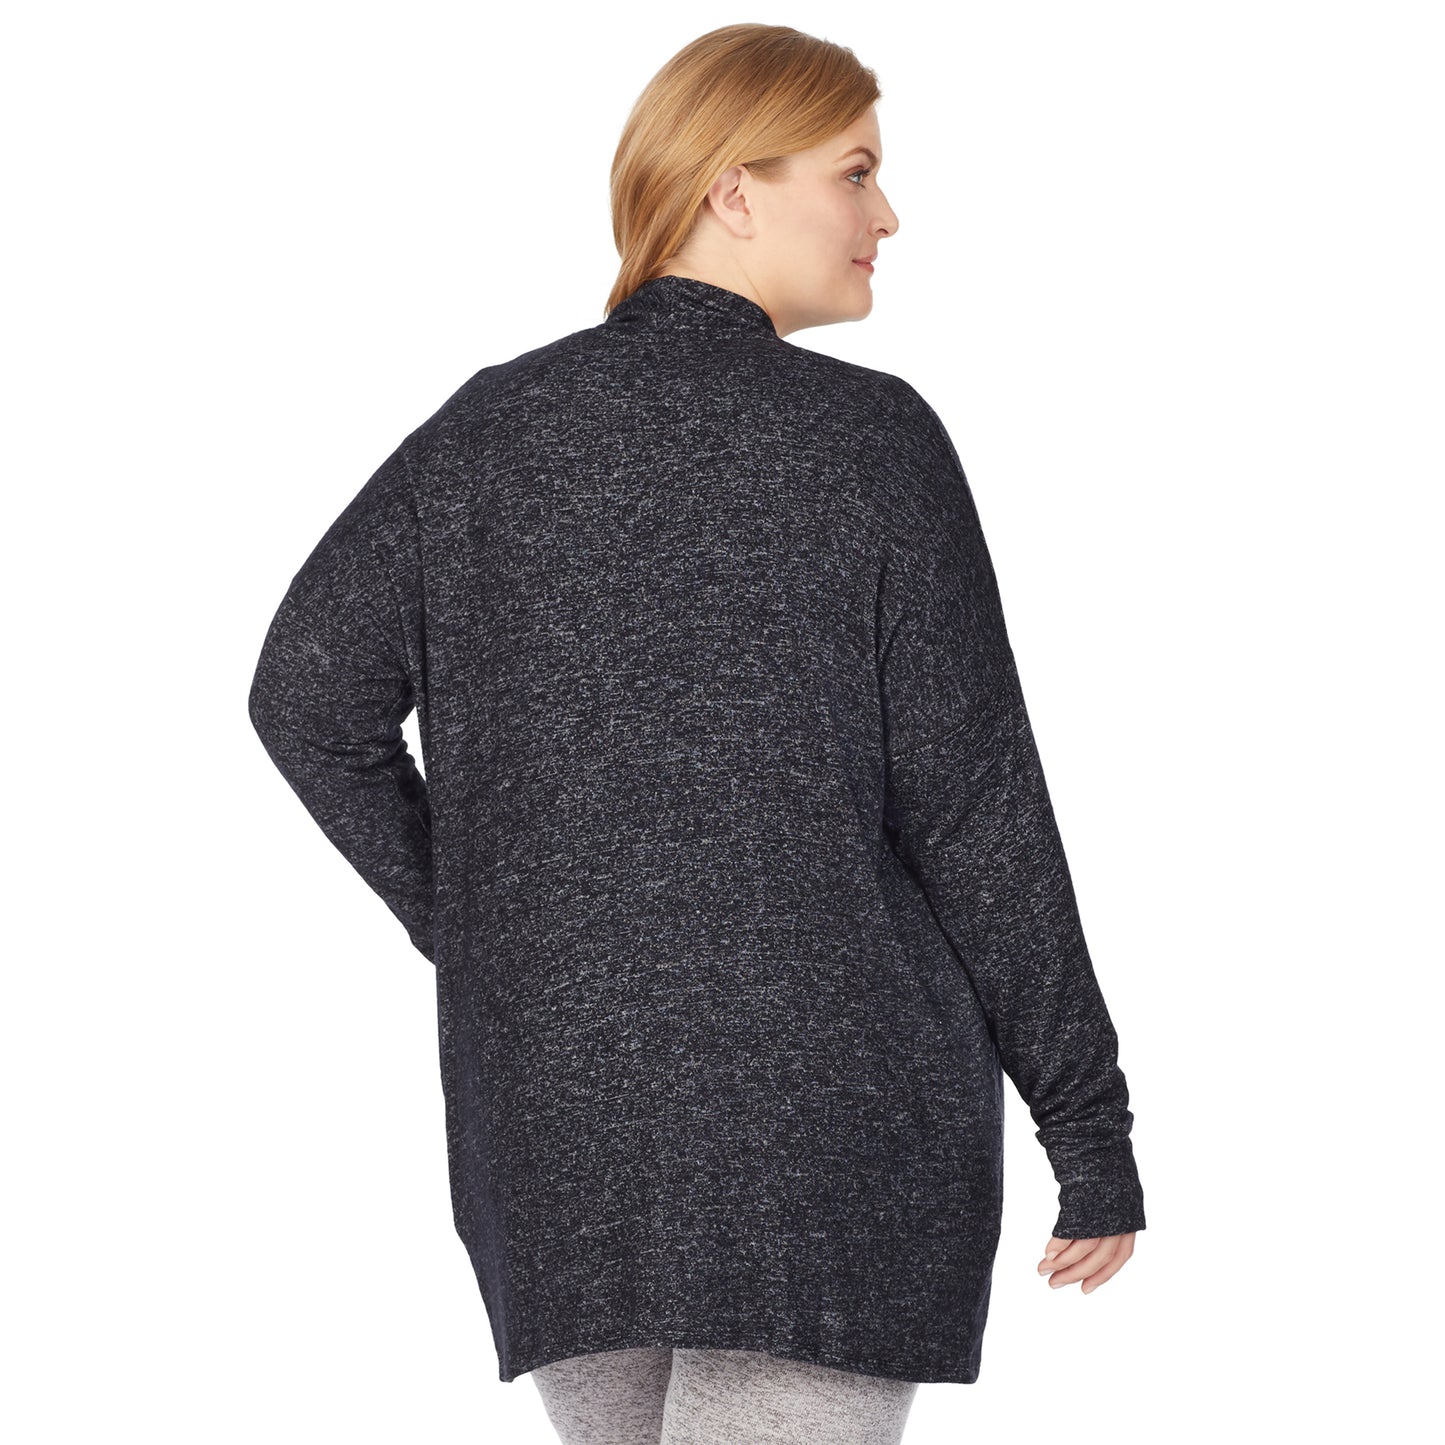 Marled Dark Charcoal; Model is wearing size 1X. She is 5'9", Bust 38", Waist 36", Hips 48.5". @A lady wearing a marled dark charcoal long sleeve wrap plus.